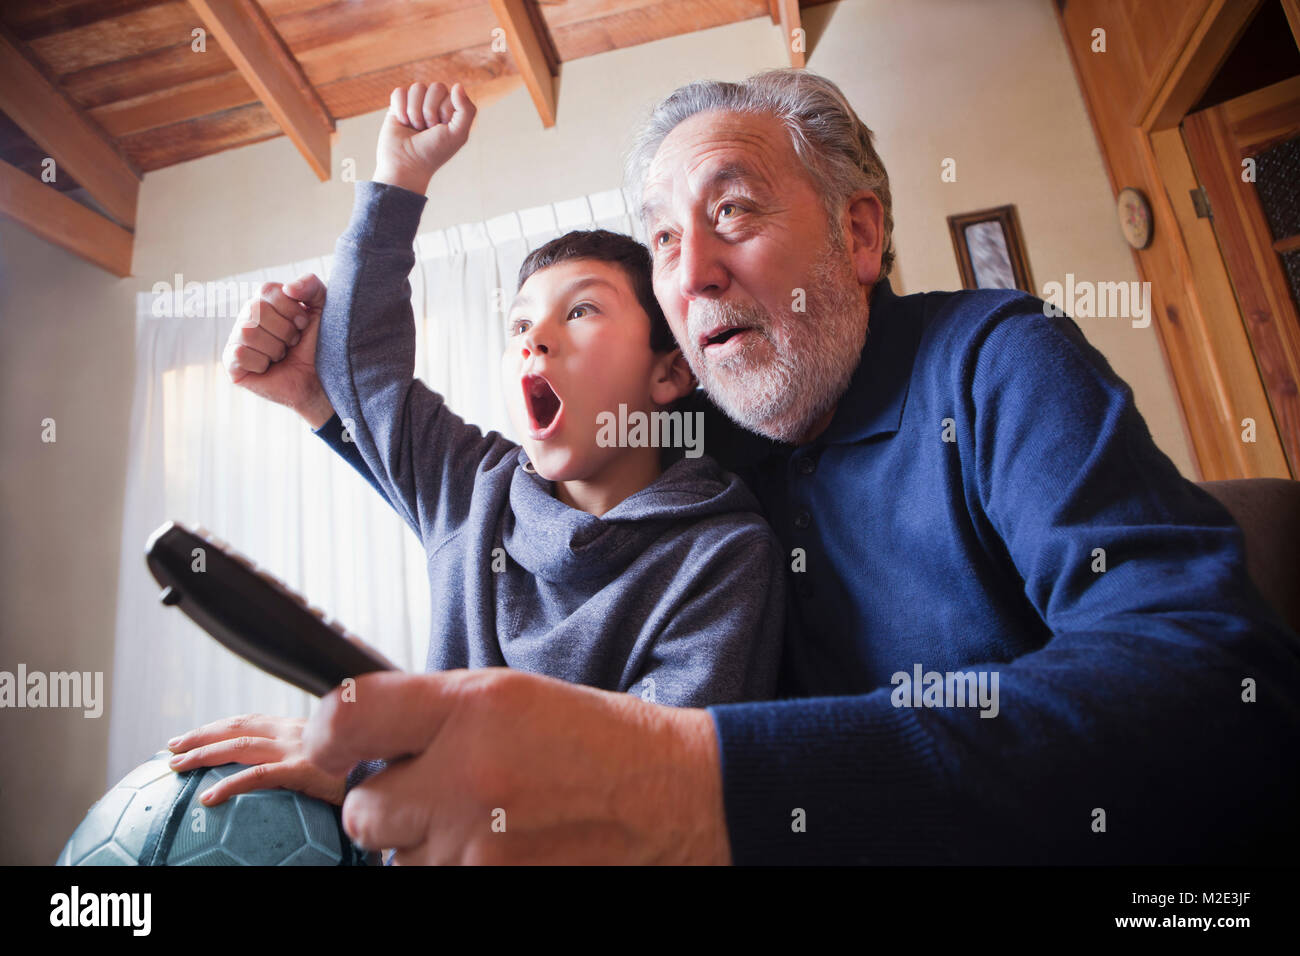 Hispanic grandfather and grandson cheering for soccer game on television Stock Photo